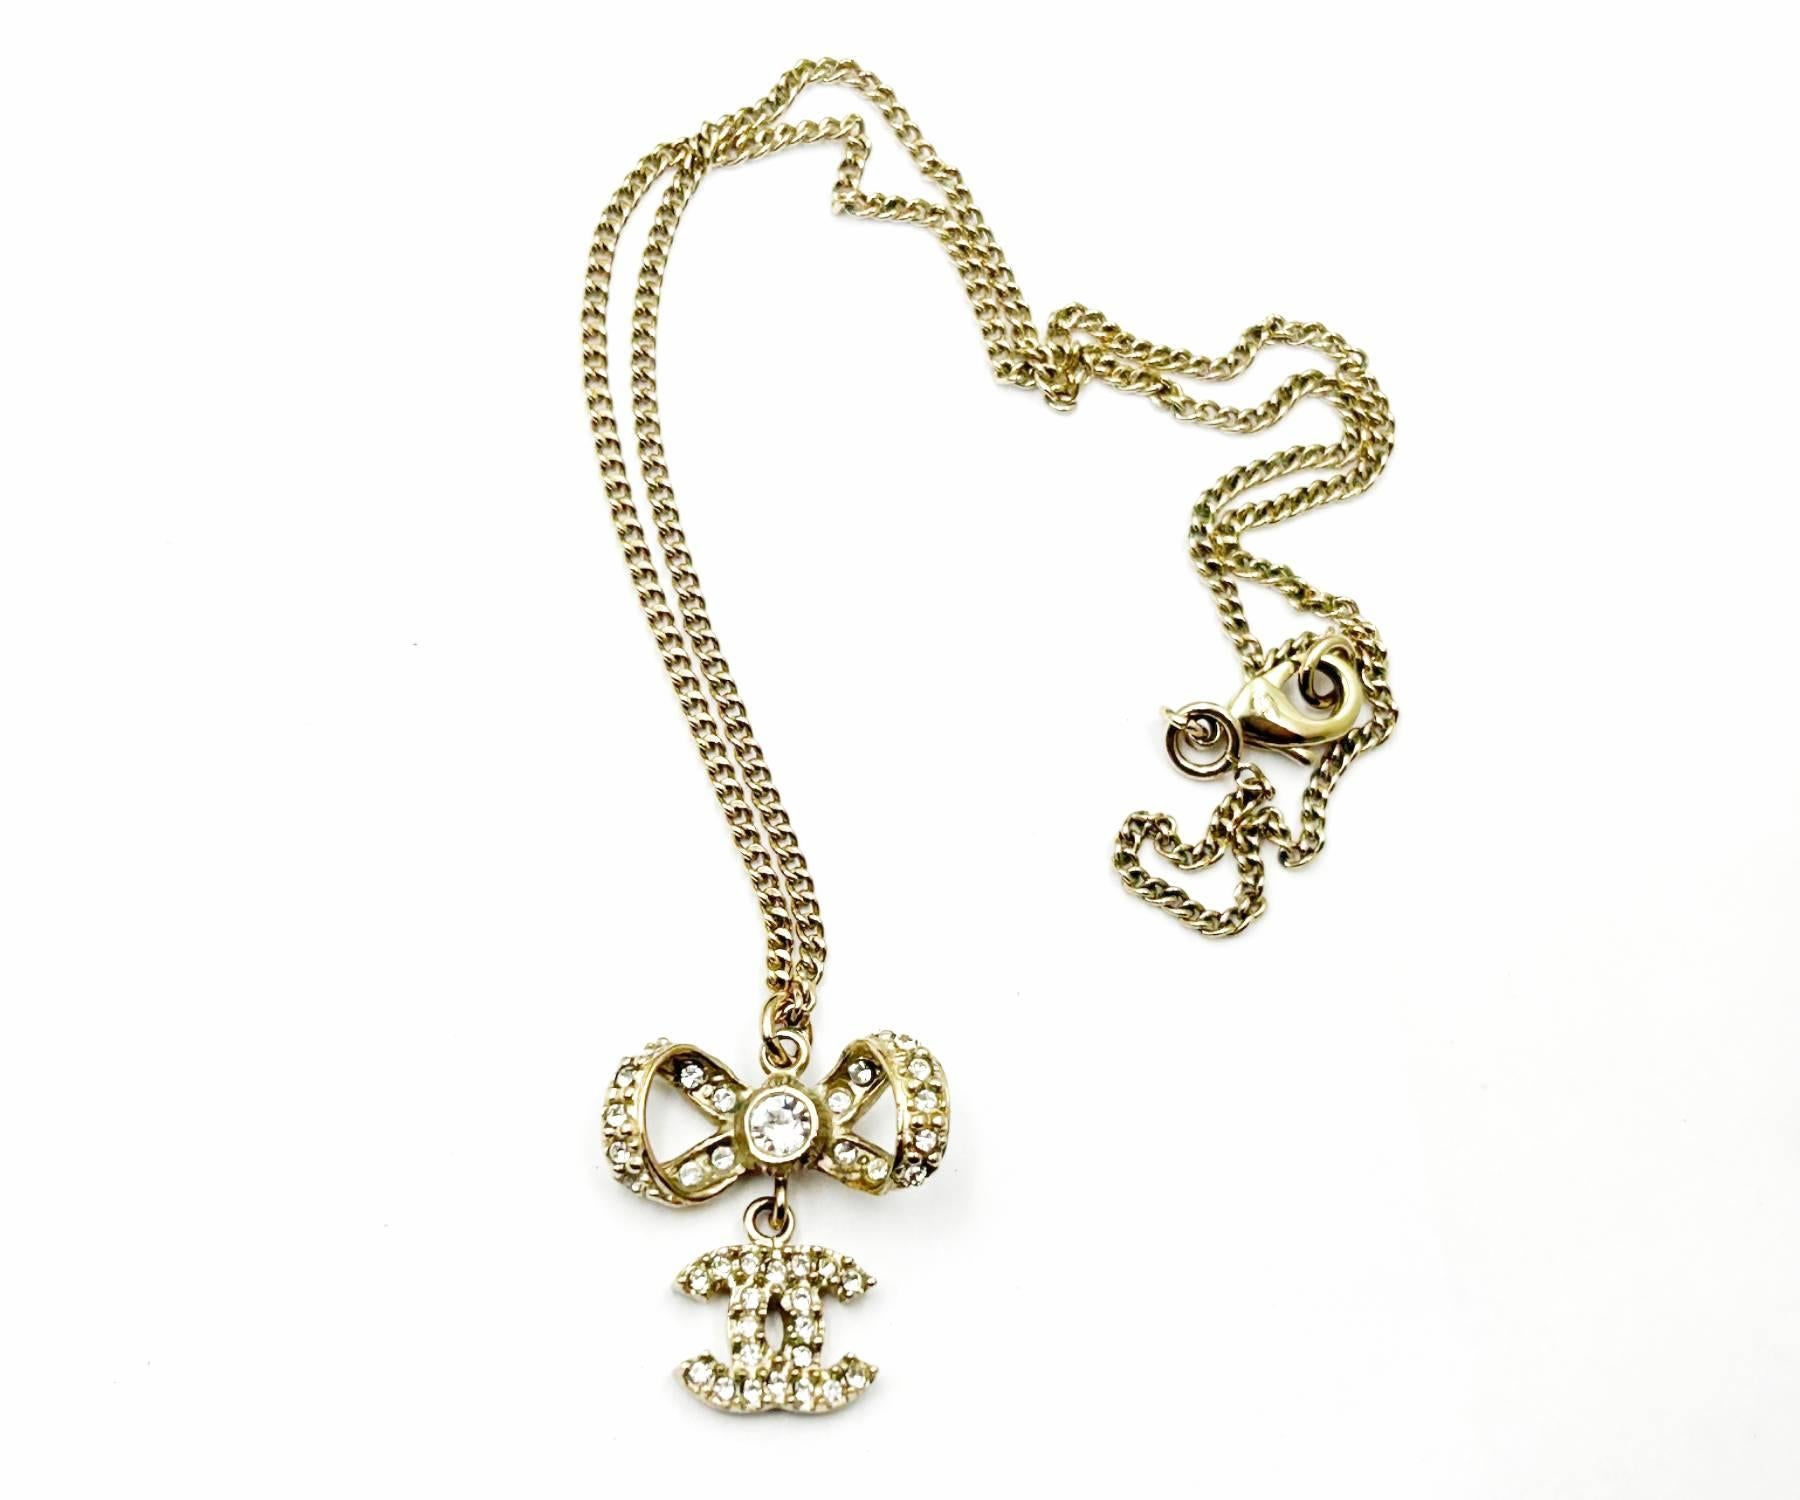 Chanel Classic Gold Ribbon Bow CC Crystal Pendant Necklace

*Marked 11
*Made in France
*Comes with the original box, dustbag and tag, in complete.

-The pendant is approximately 0.9